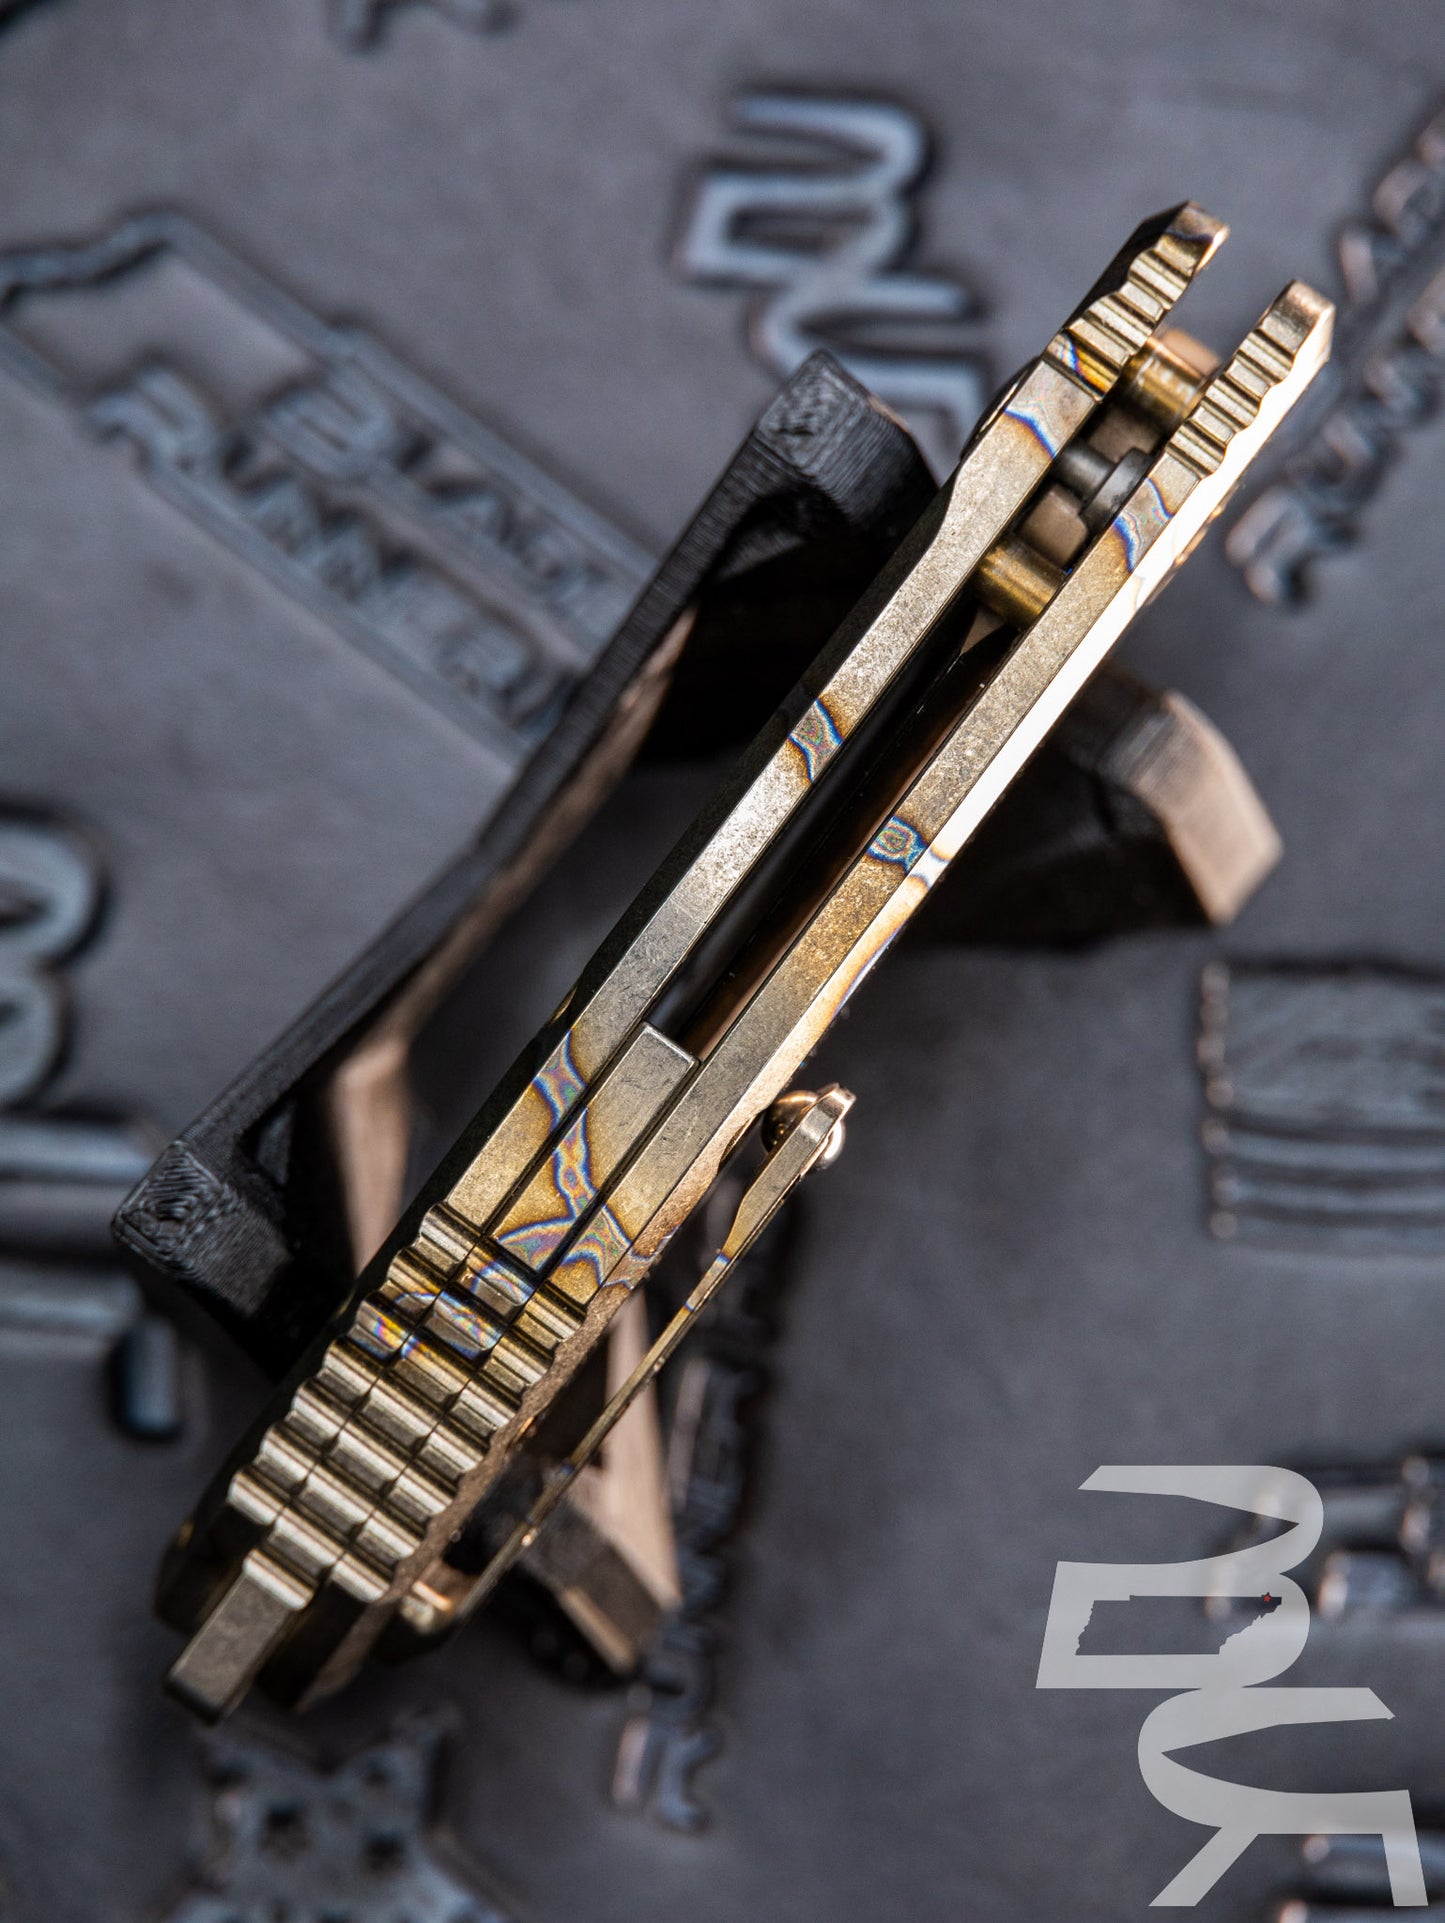 Pre Owned! Heretic Knives Medusa Tanto Battle Worn Bronze Elmax Flamed Titanium Automatic Knife H011-7A-FTI